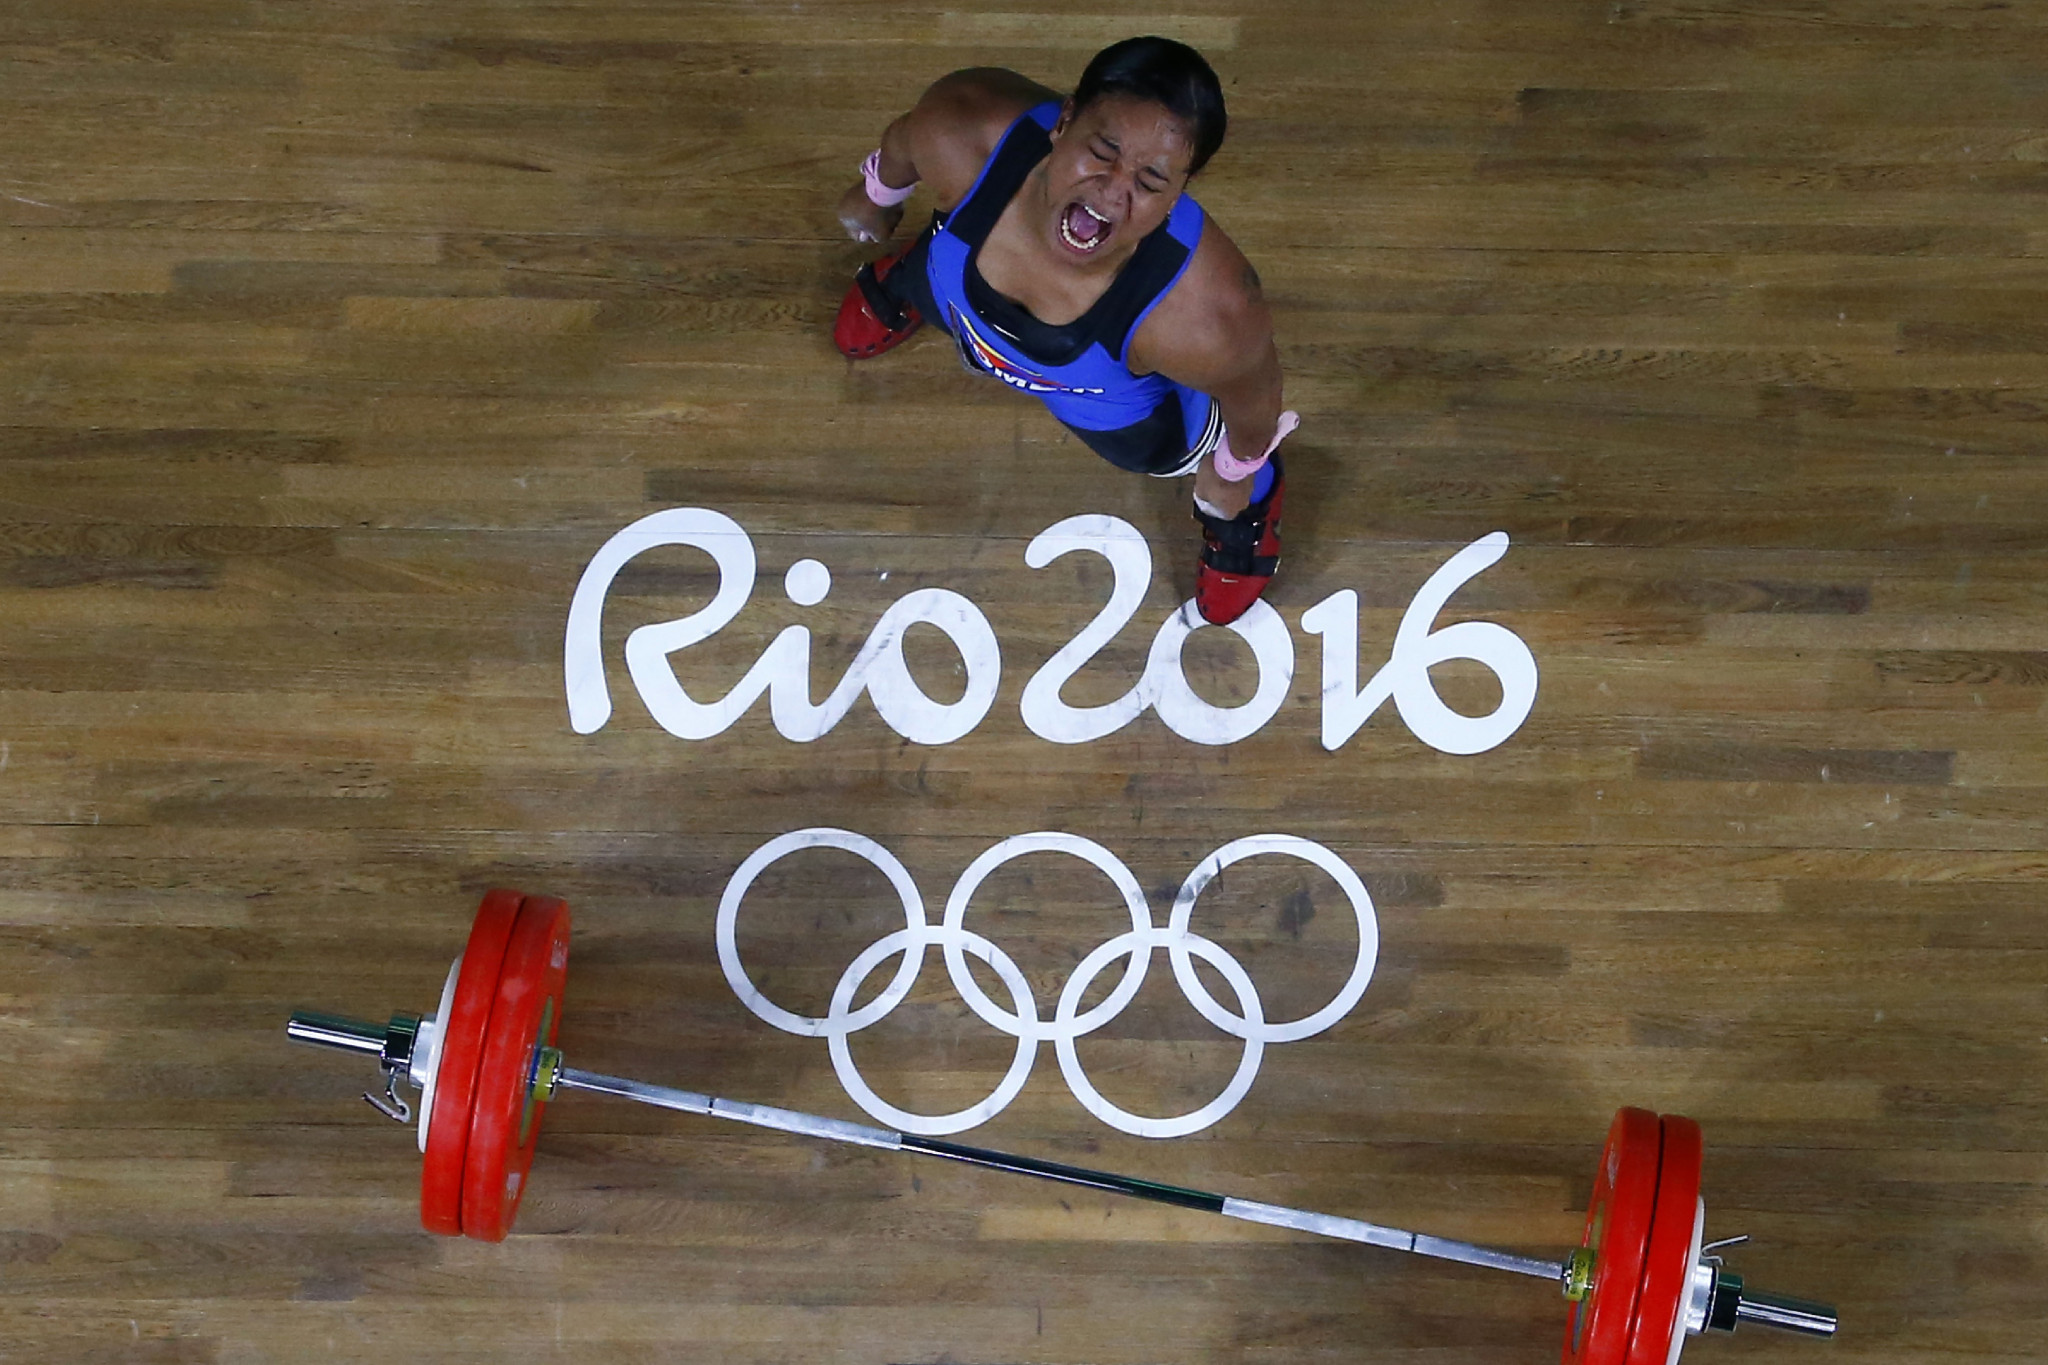 Weightlifting's place on the Olympic programme is not guaranteed beyond Tokyo 2020 ©Getty Images